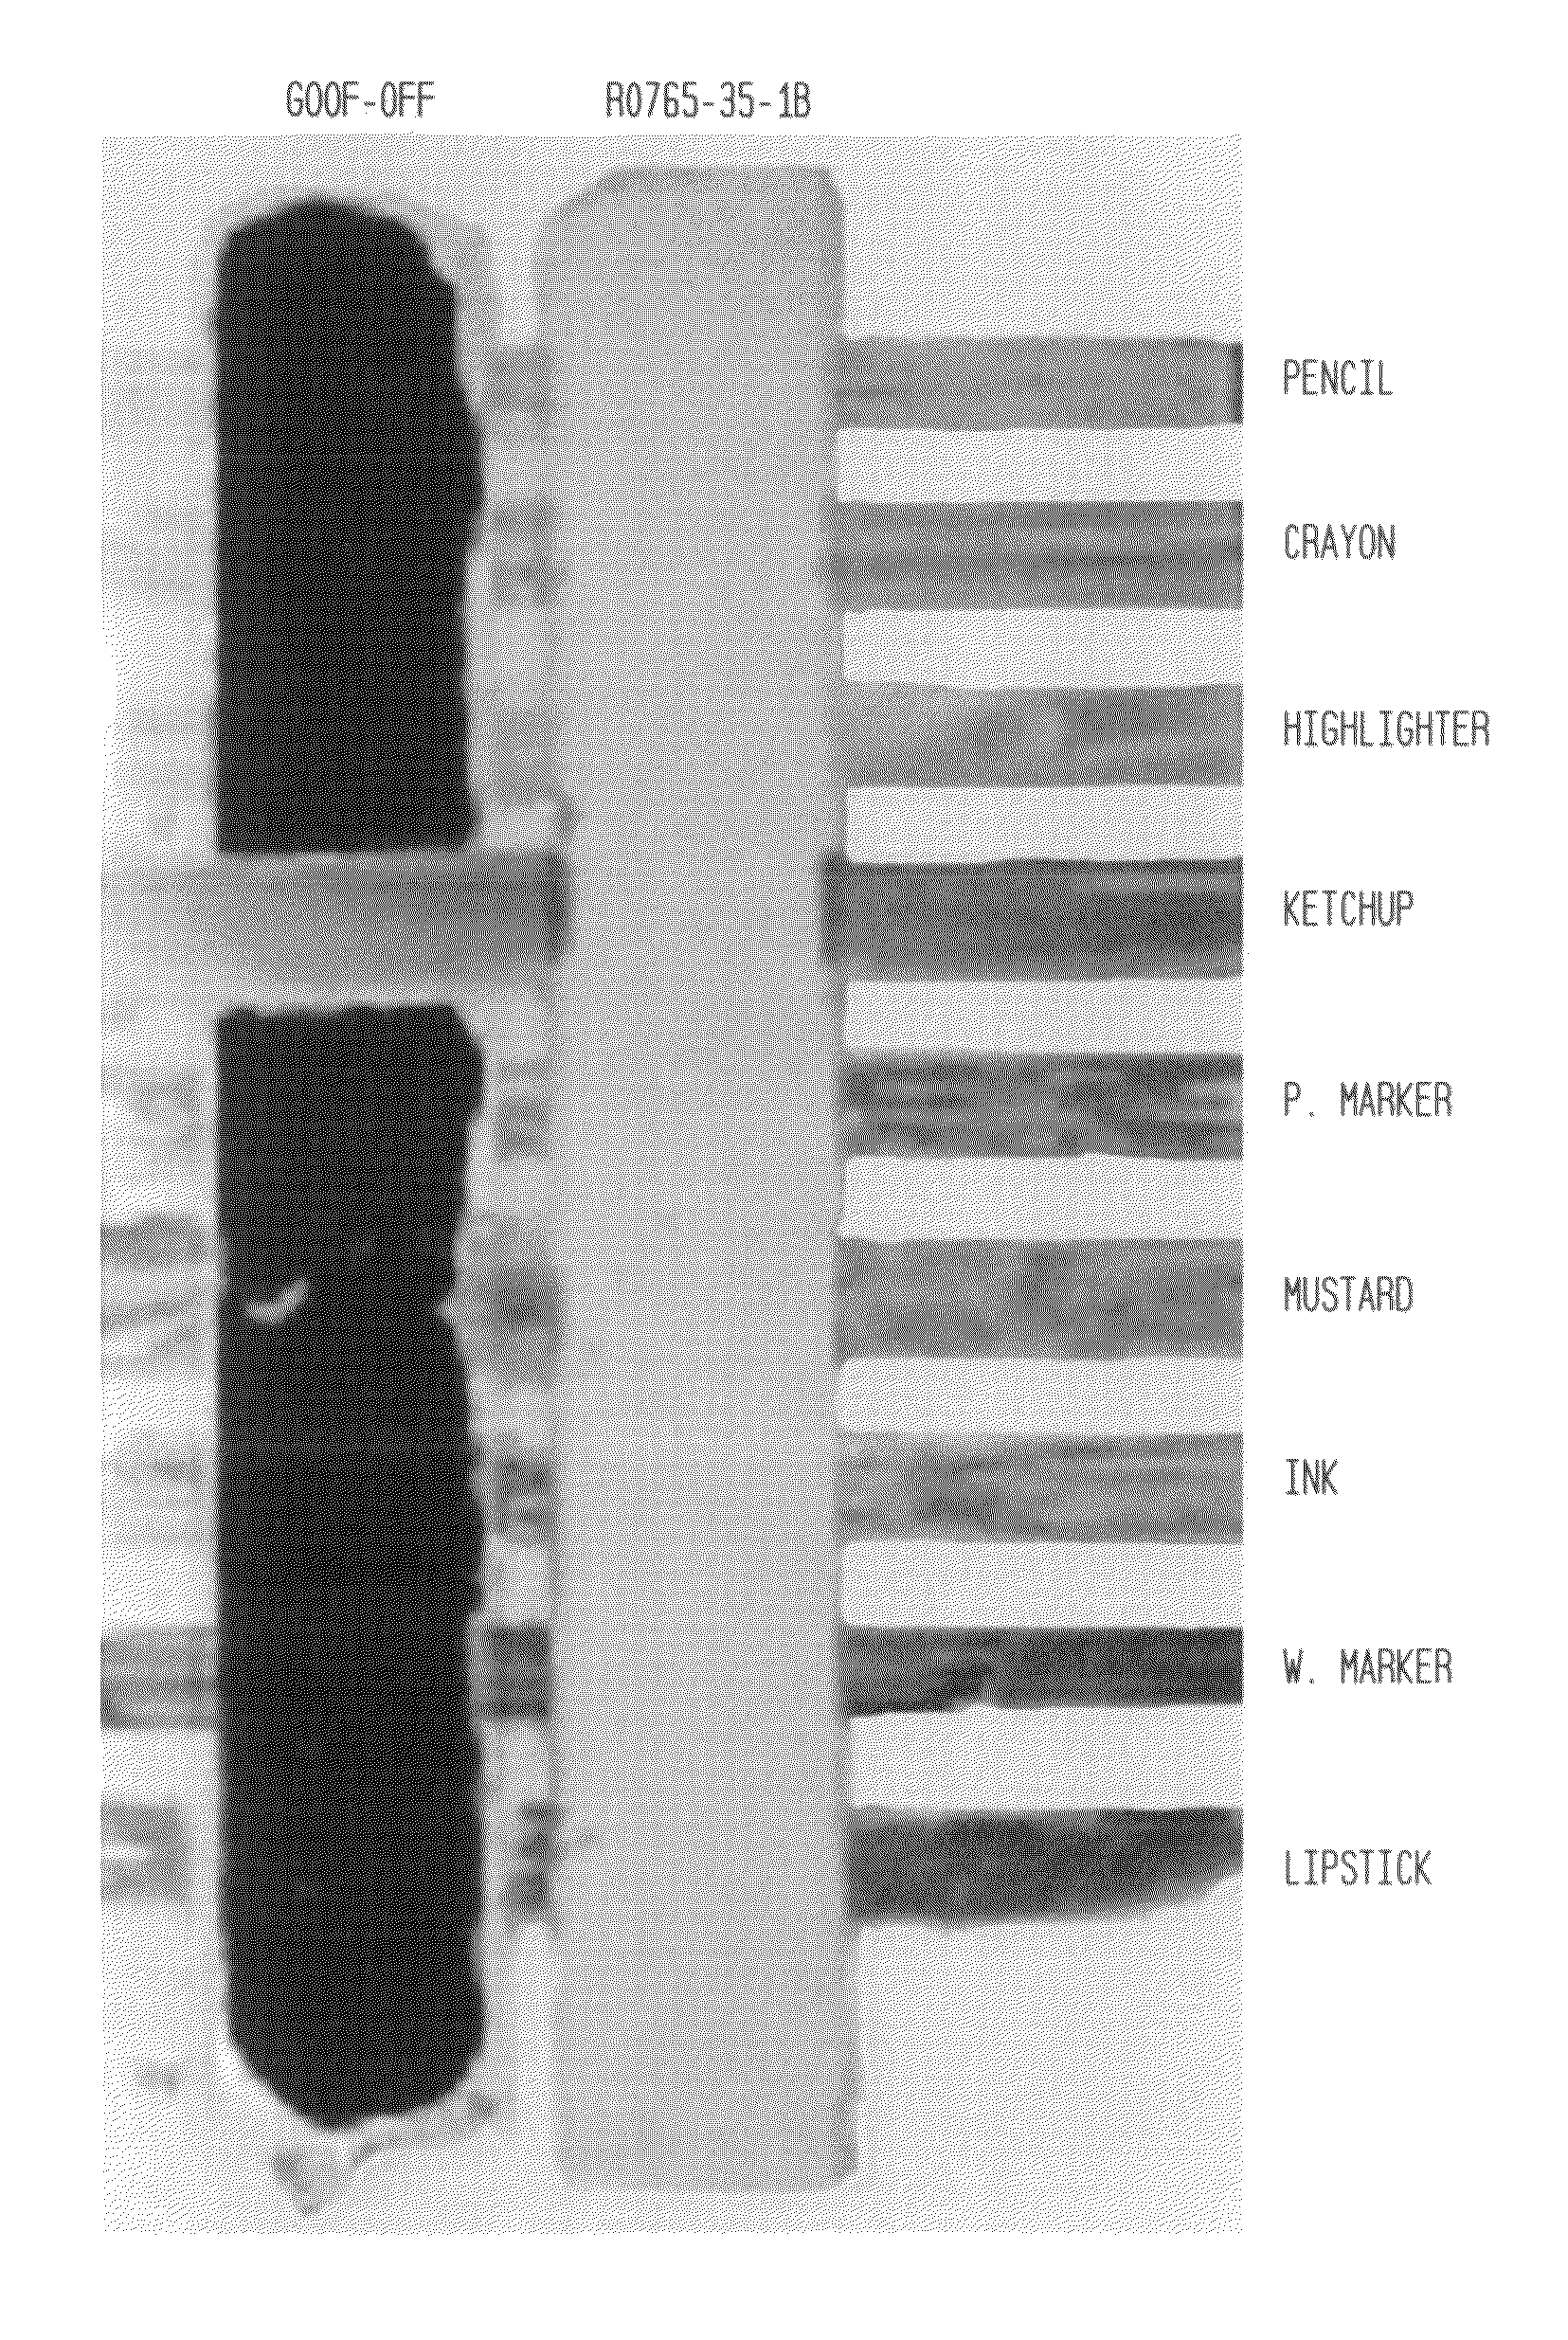 Cleaning compositions incorporating green solvents and methods for use